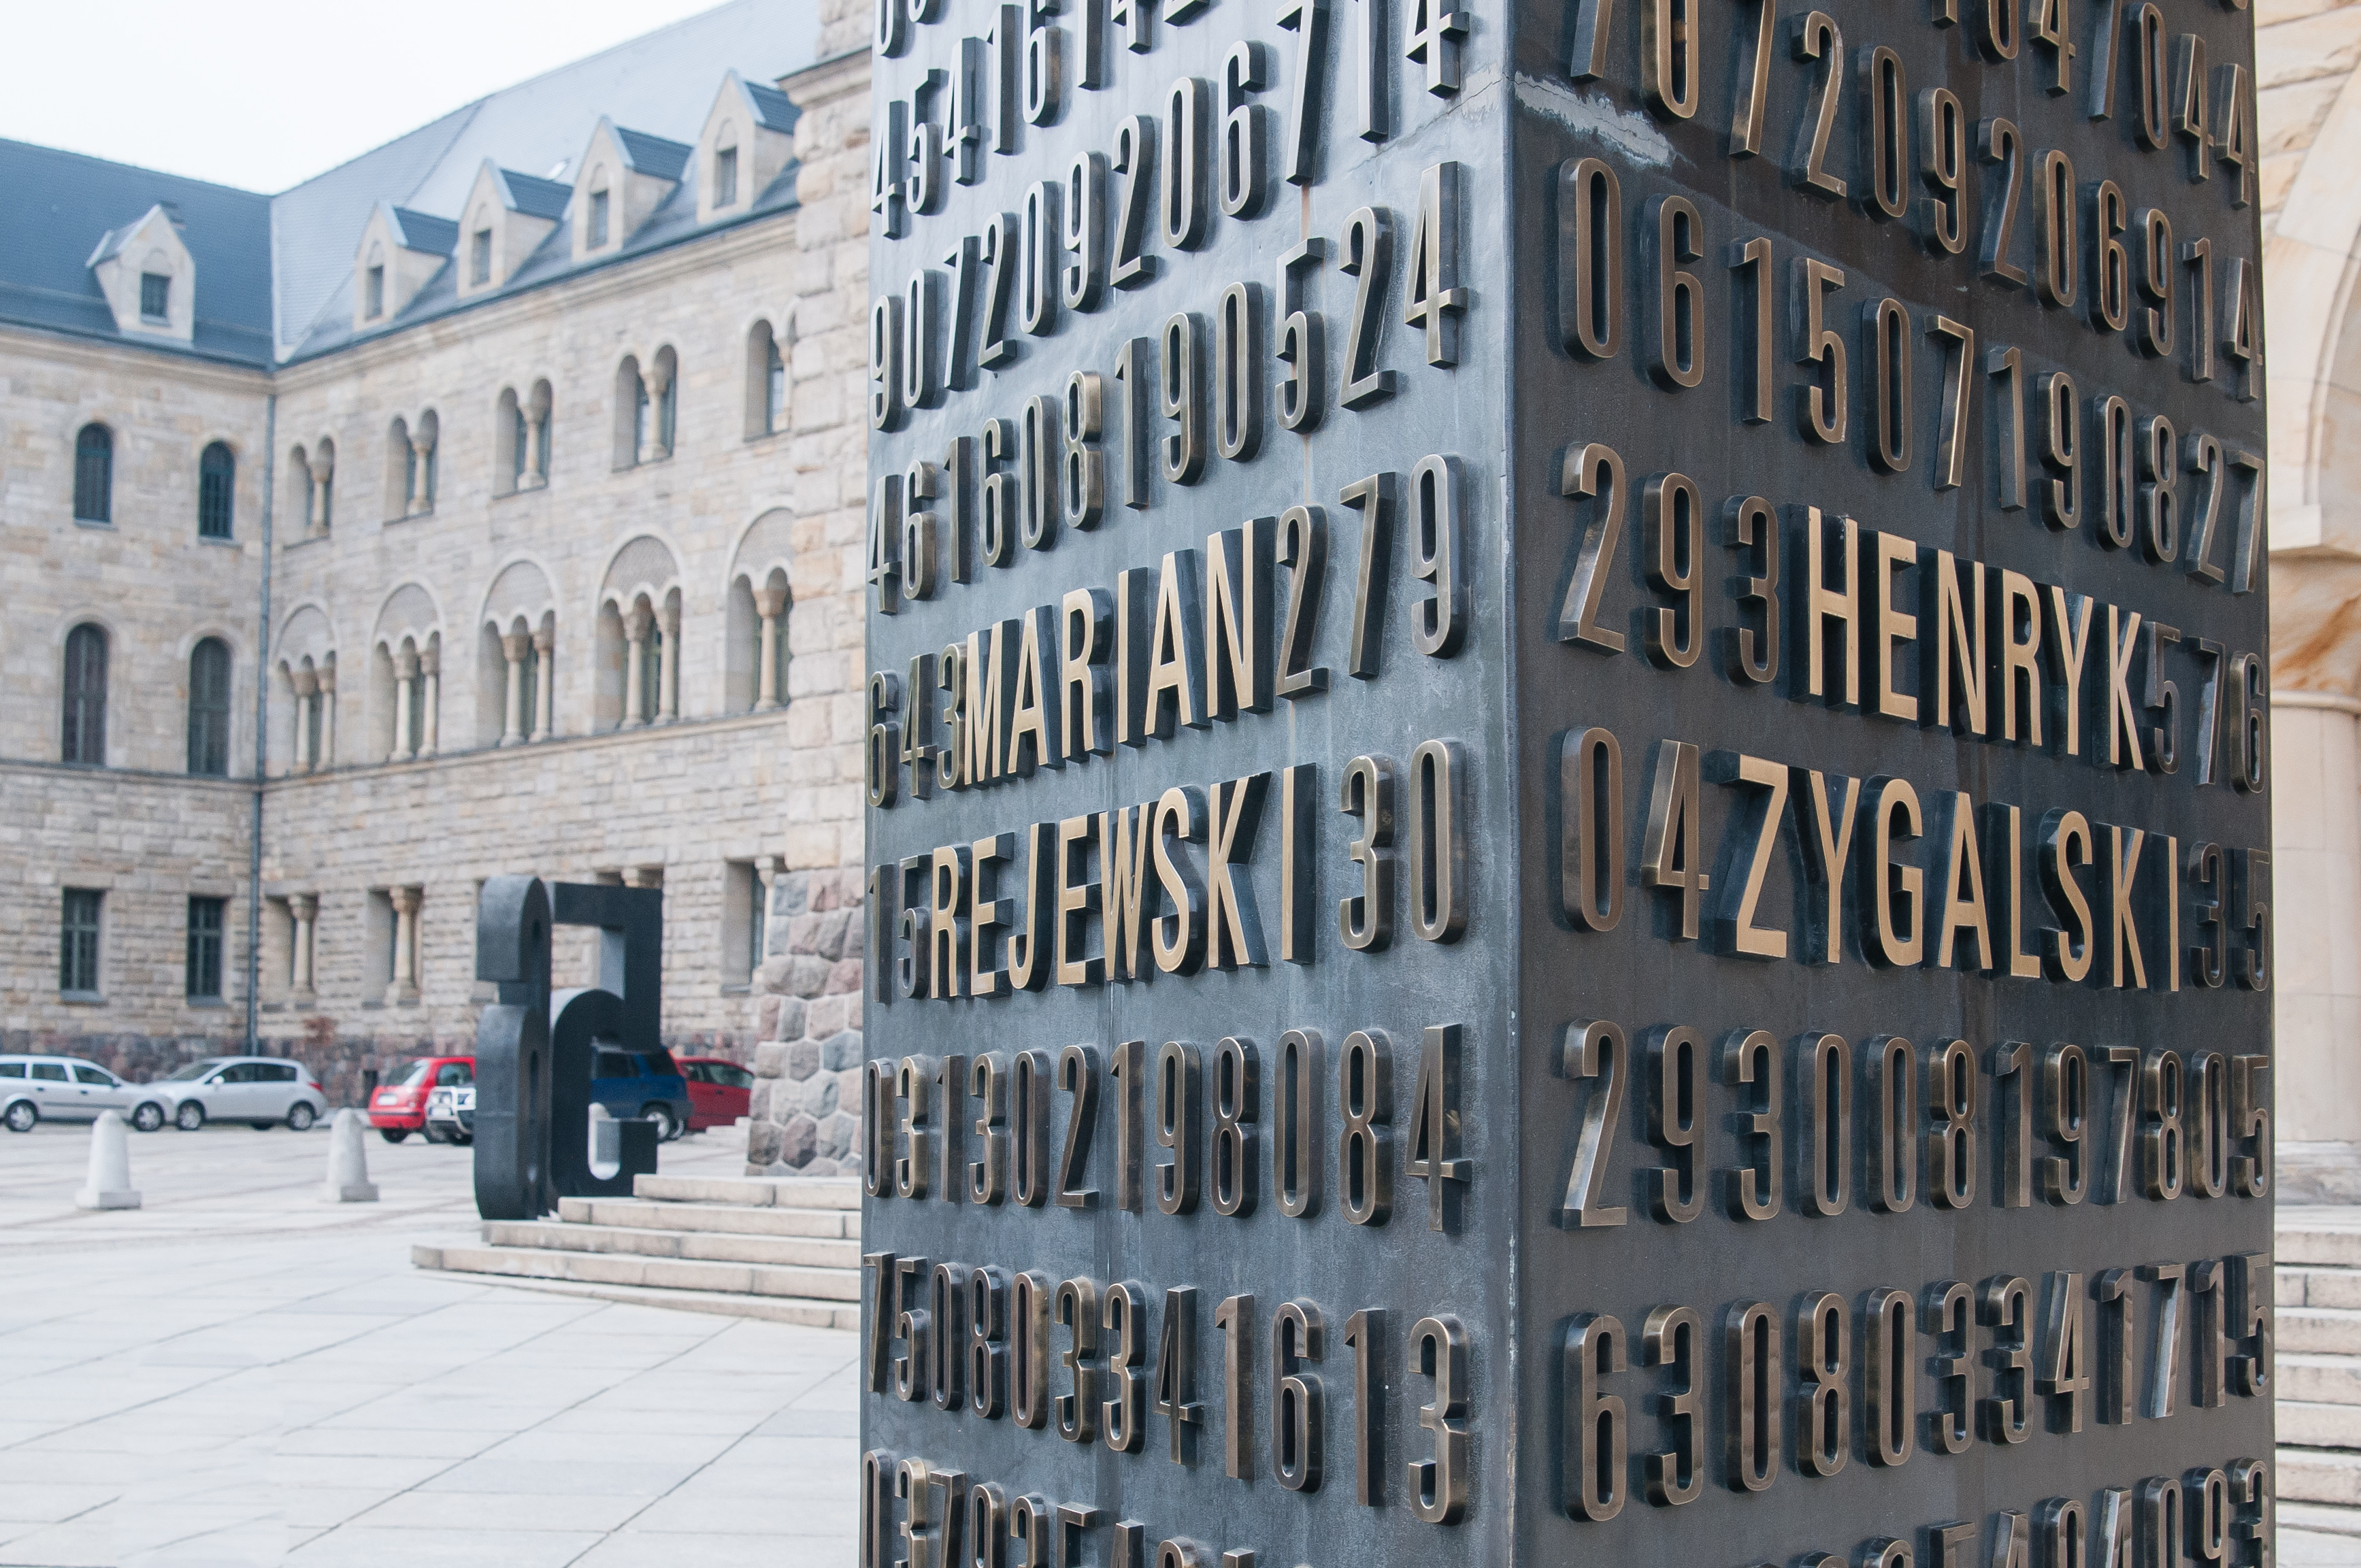 The sculpture of Polish Cryptologists - Enigma Breakers